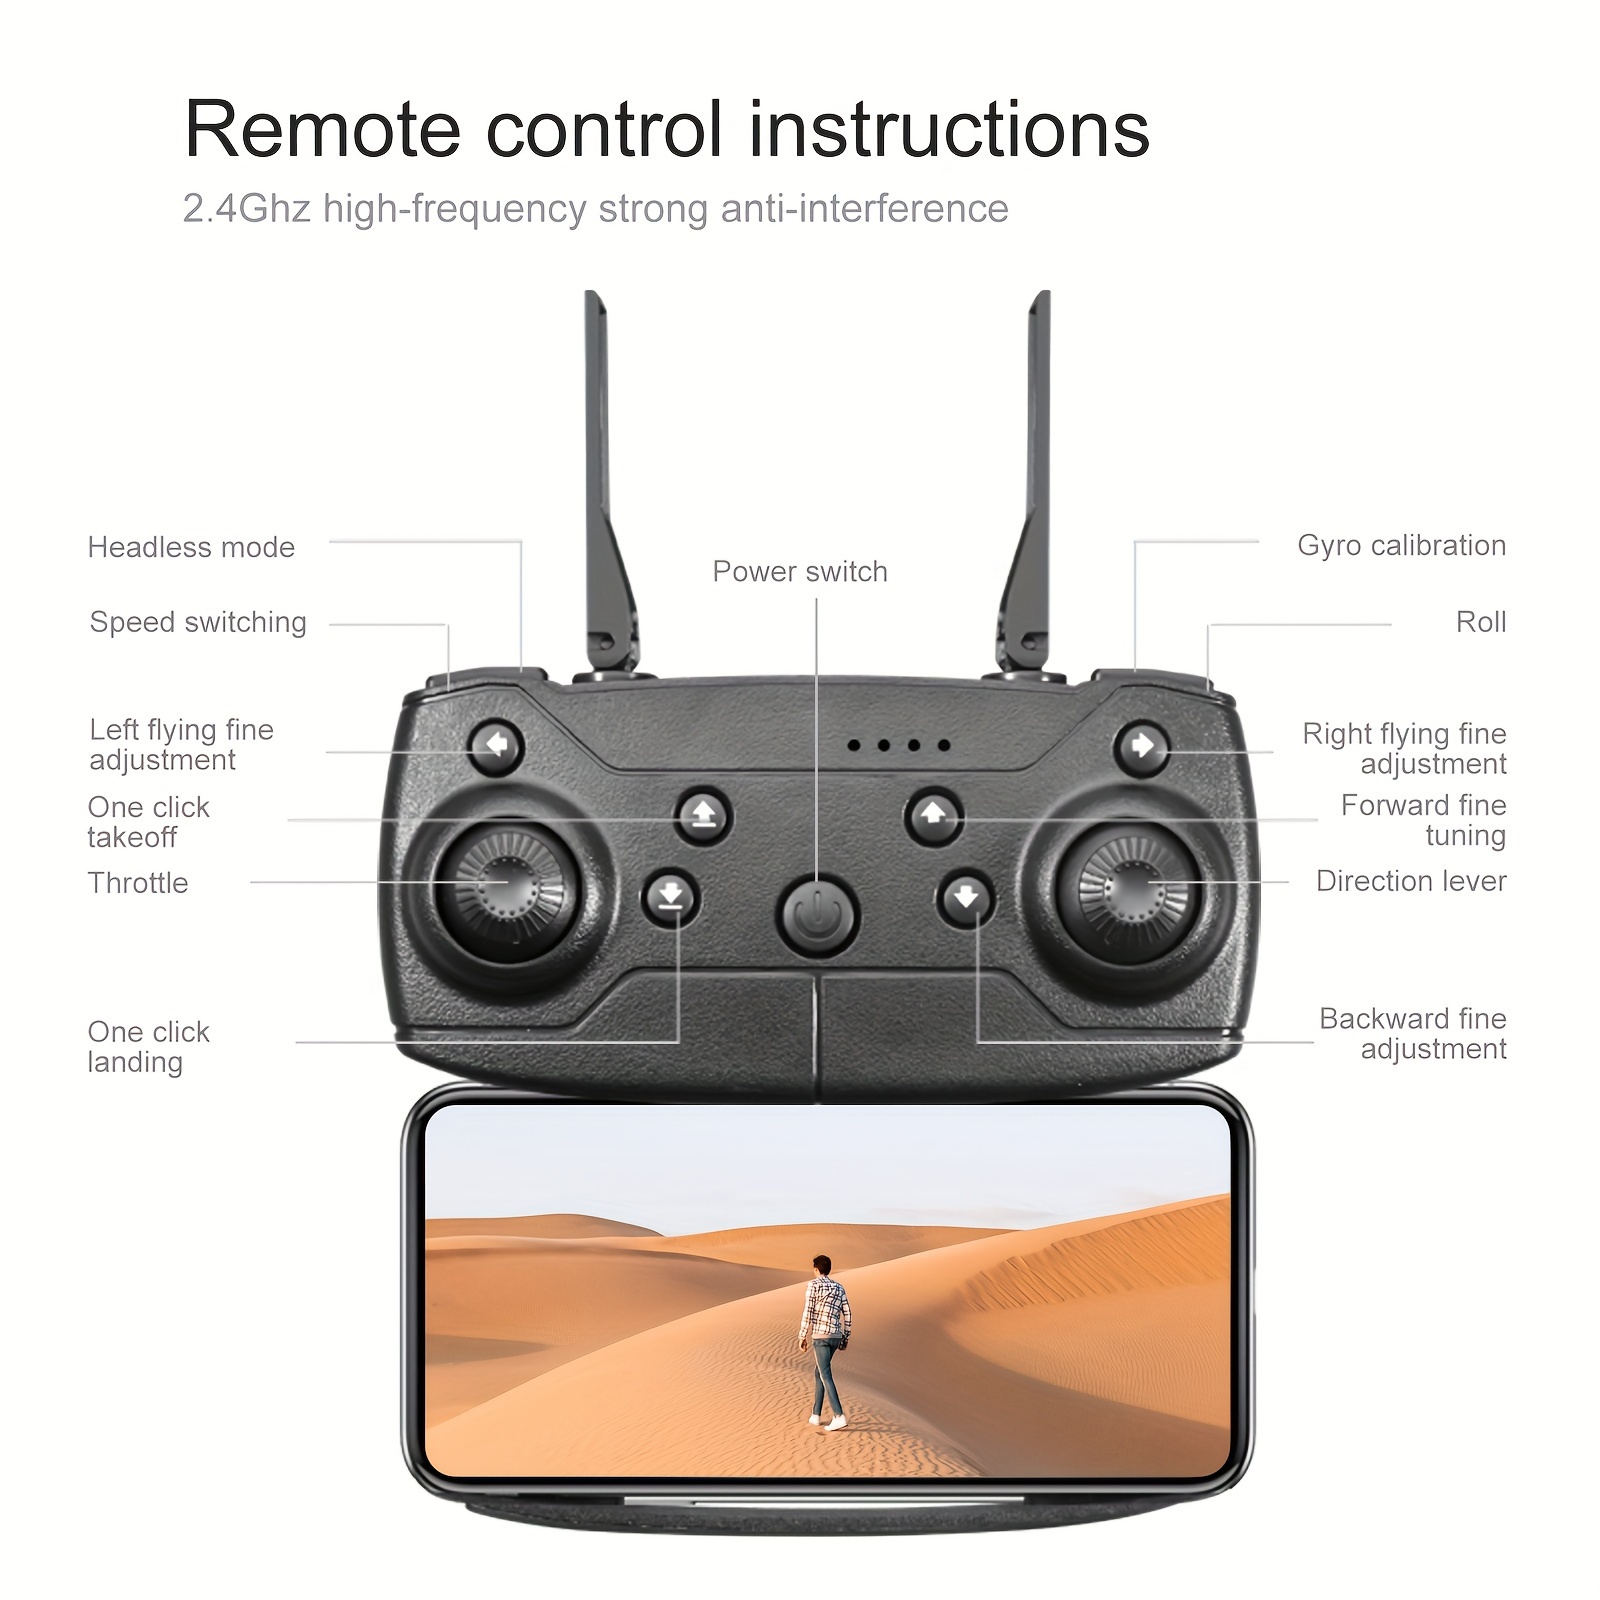 s91 remote remote control drone with hd dual camera adjustable headless mode track flying one key surround smart follow brushless motor drone self with optical flow positioning function details 19